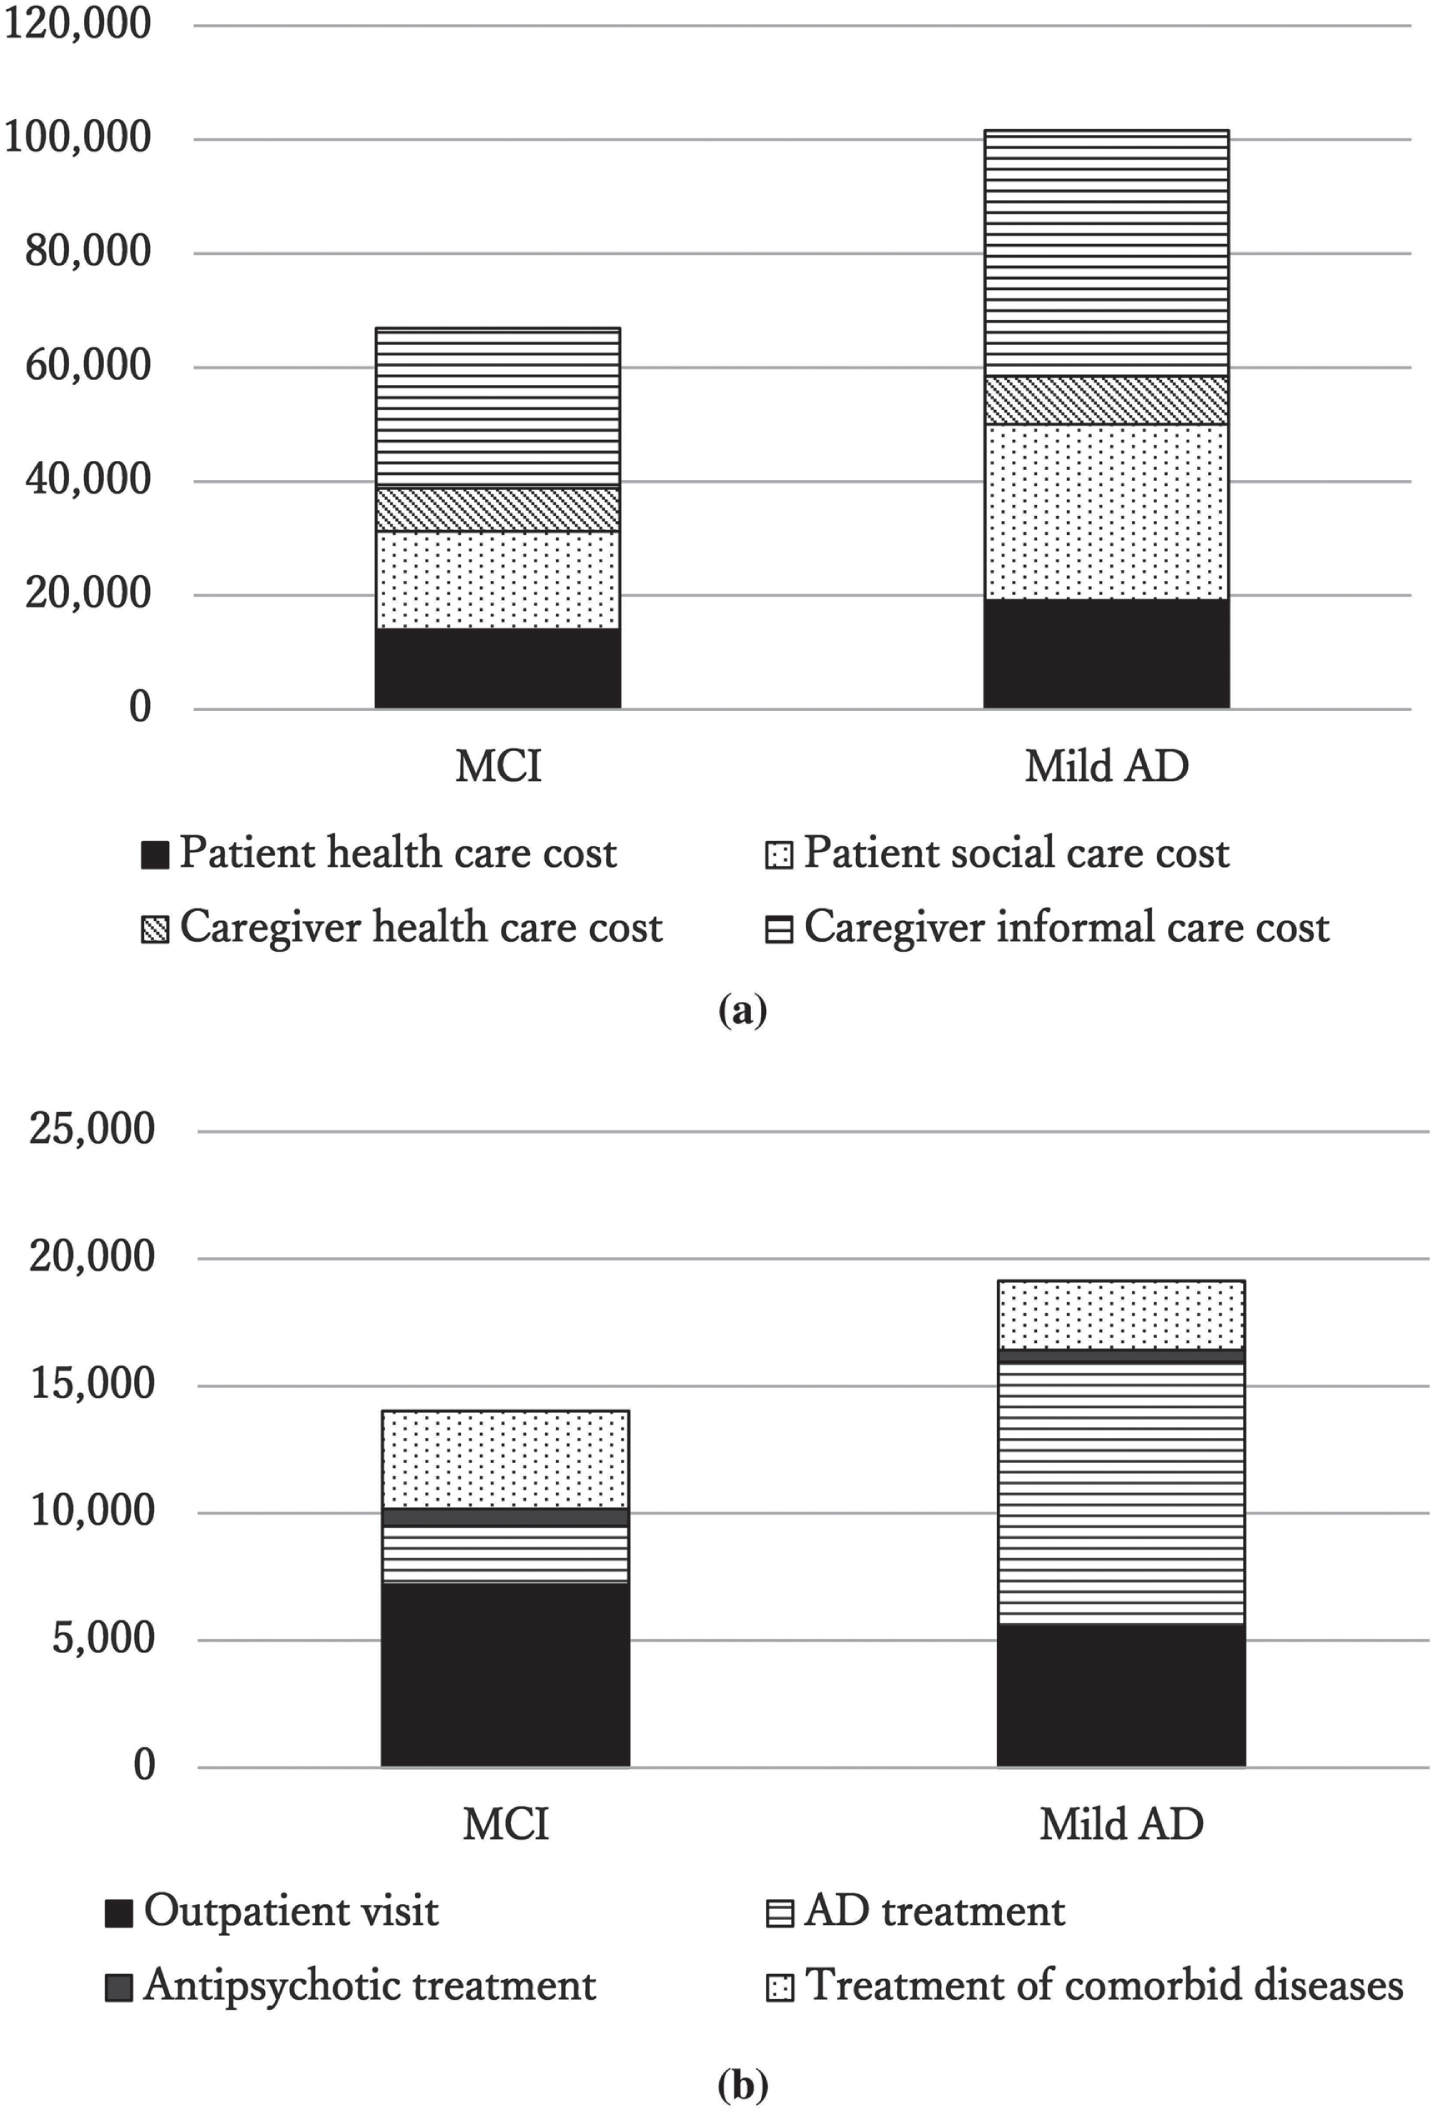 (a) Monthly mean cost for each of the four cost components associated with MCI and mild AD. In the bar graph, patient medical costs are filled in black, patient social care costs are indicated with dots, family caregiver medical costs are indicated with oblique lines, and family caregiver informal care costs are indicated with horizontal lines. The vertical axis is in Japanese yen. In 2019, the average exchange rate for 1 USD was 109.0 yen. (b) Monthly mean cost for each of the four cost components among the patient medical costs associated with MCI and mild AD. In the bar graph, anti-dementia drug treatment costs are indicated with horizontal lines, outpatient visits are filled in black, antipsychotic treatment costs are filled in gray, and treatment of comorbid diseases are indicated with dots. The vertical axis is in Japanese yen. In 2019, the average exchange rate for 1 USD was 109.0 yen.